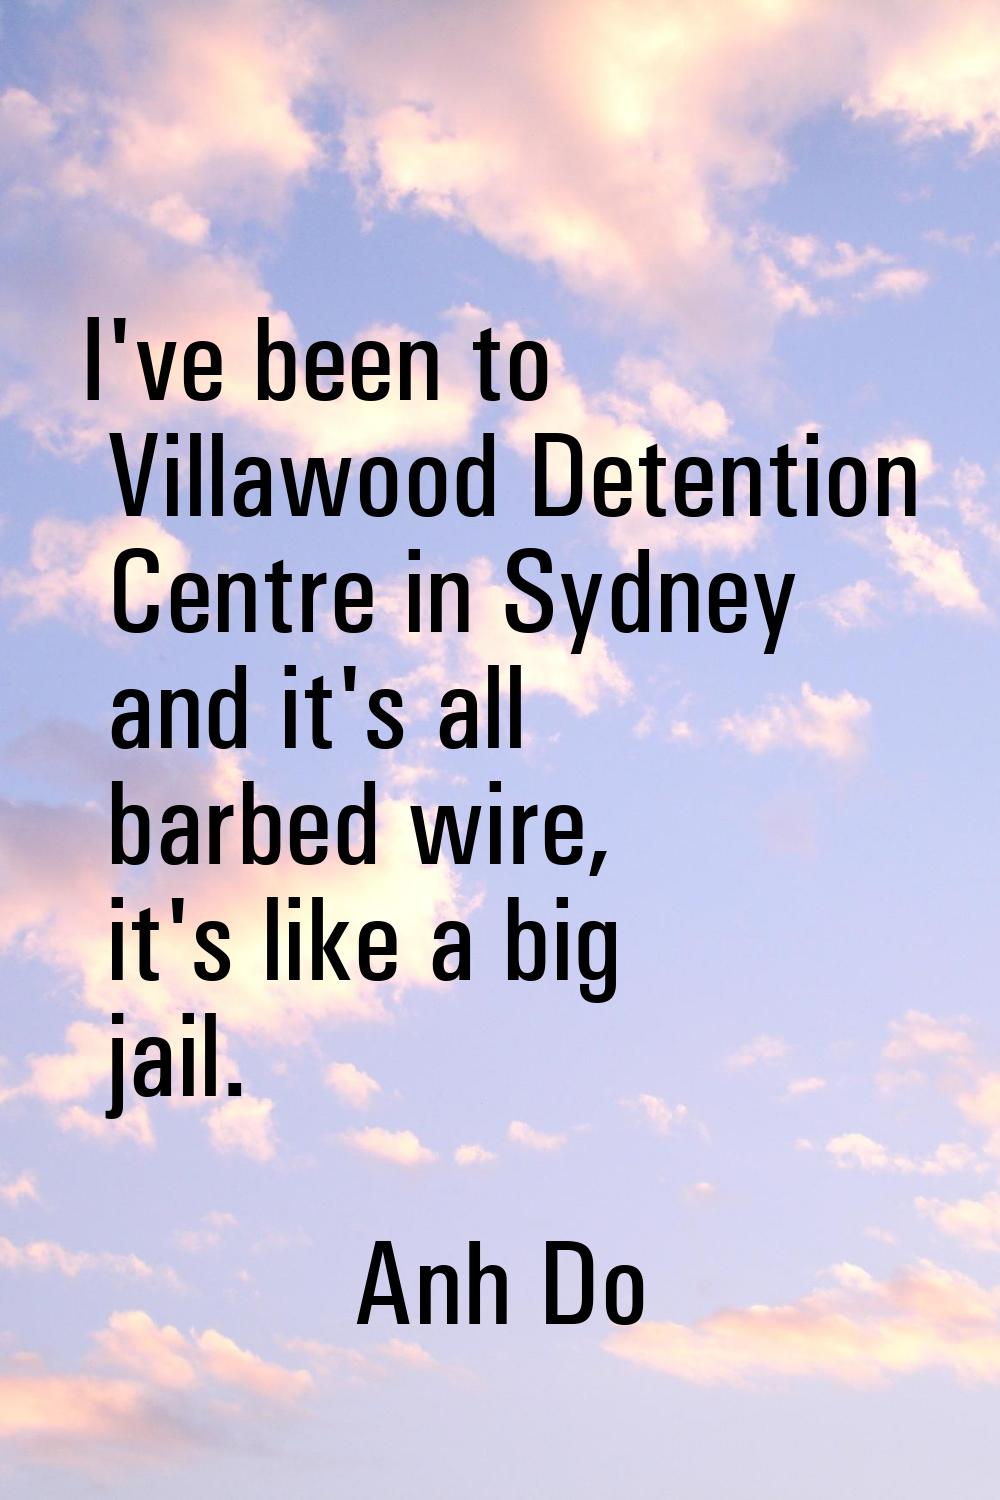 I've been to Villawood Detention Centre in Sydney and it's all barbed wire, it's like a big jail.